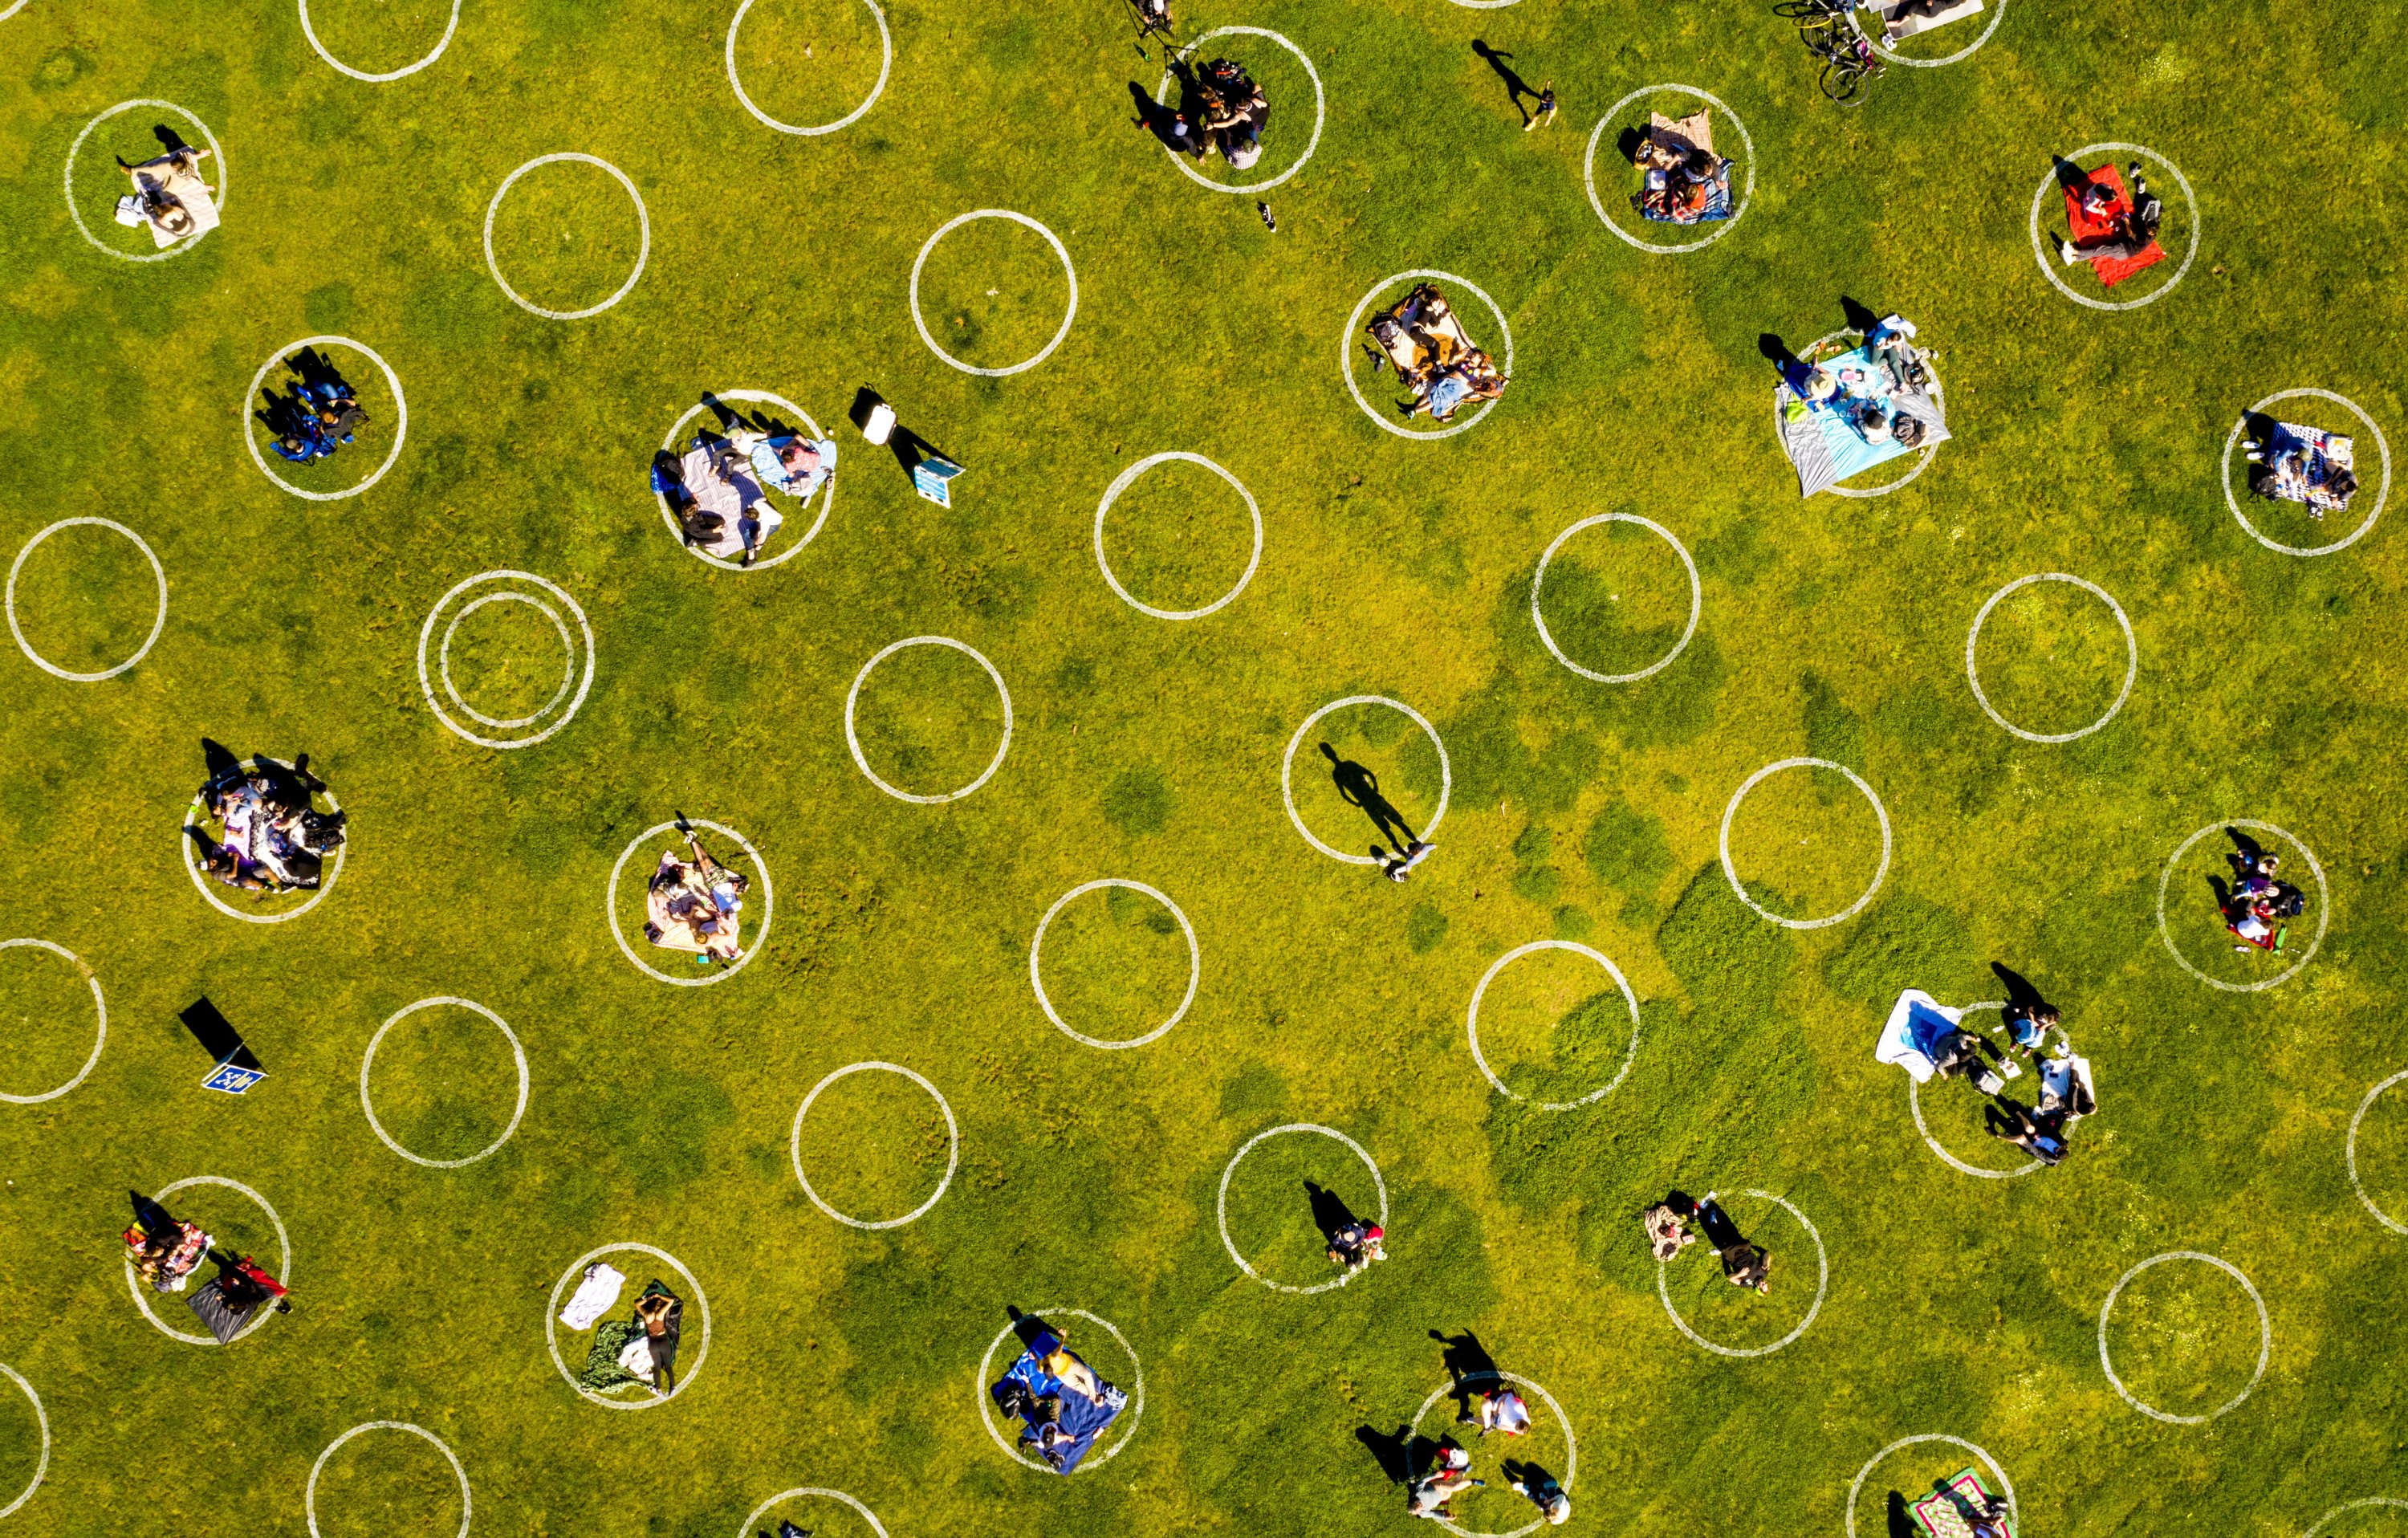 People in San Francisco's Dolores Park sit inside painted circles designed to help them keep a healthy distance, California, U.S., May 2, 2020. (AP Photo)